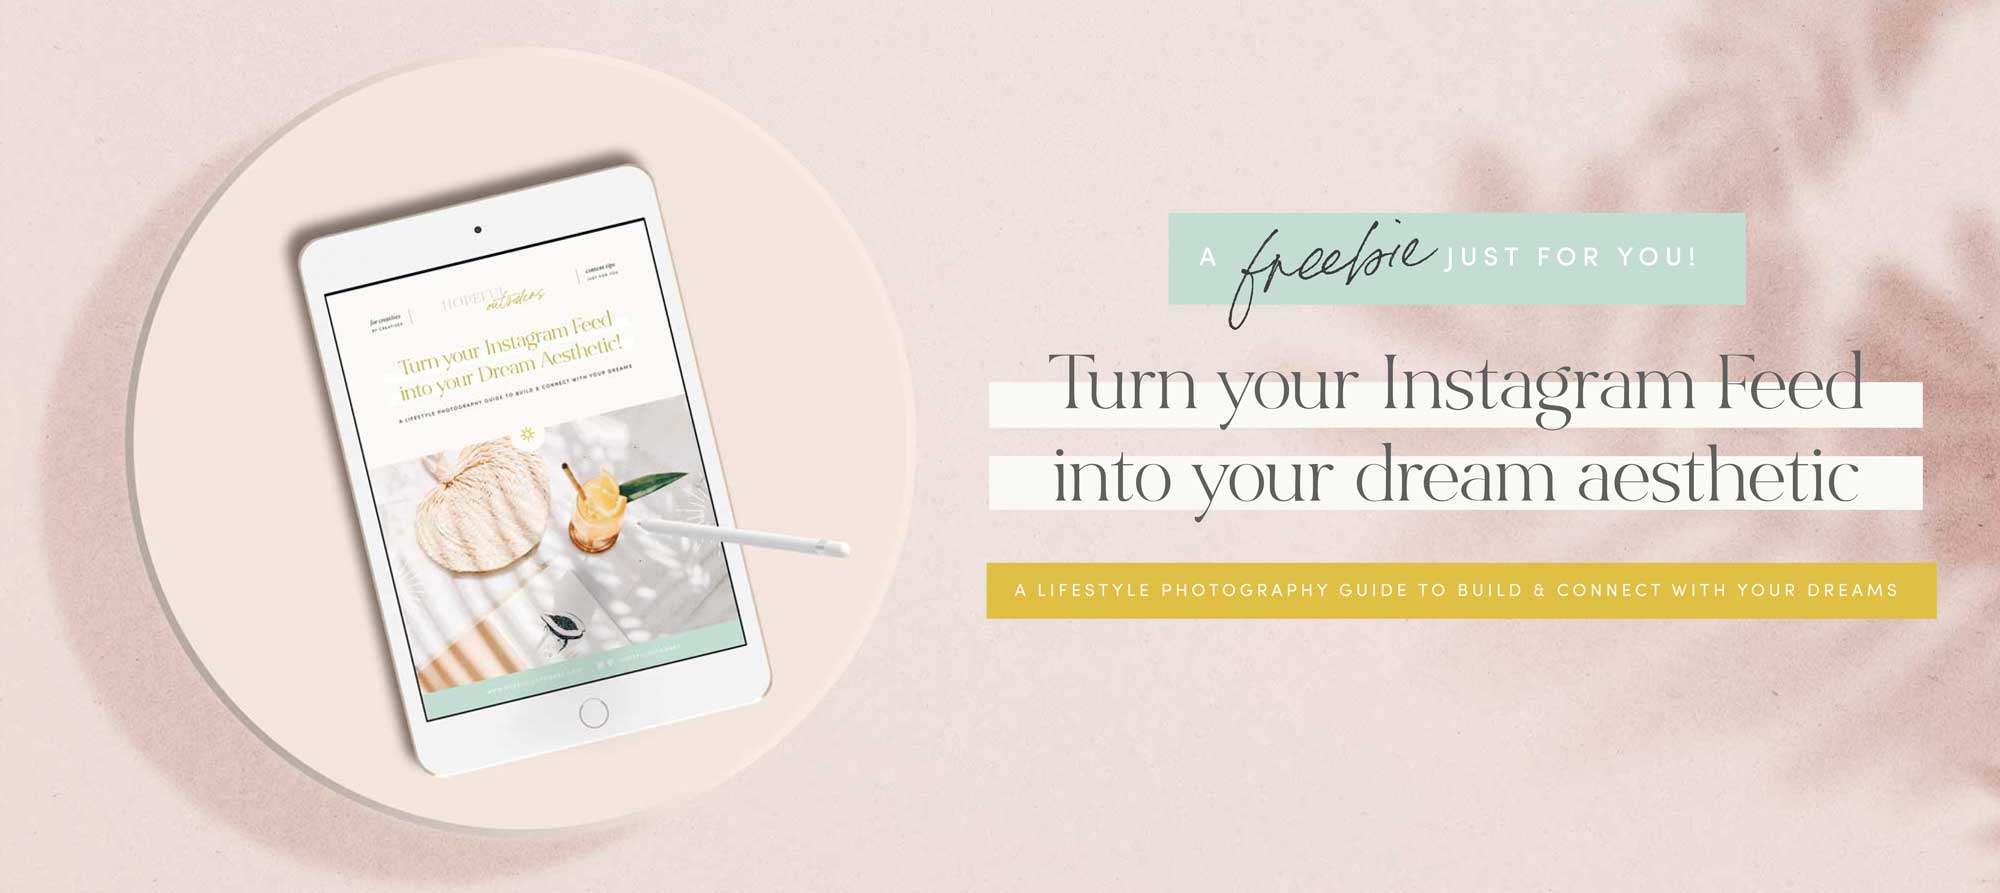 Turn your Instagram Feed into your dream aesthetic freebie by Hopeful Outsiders